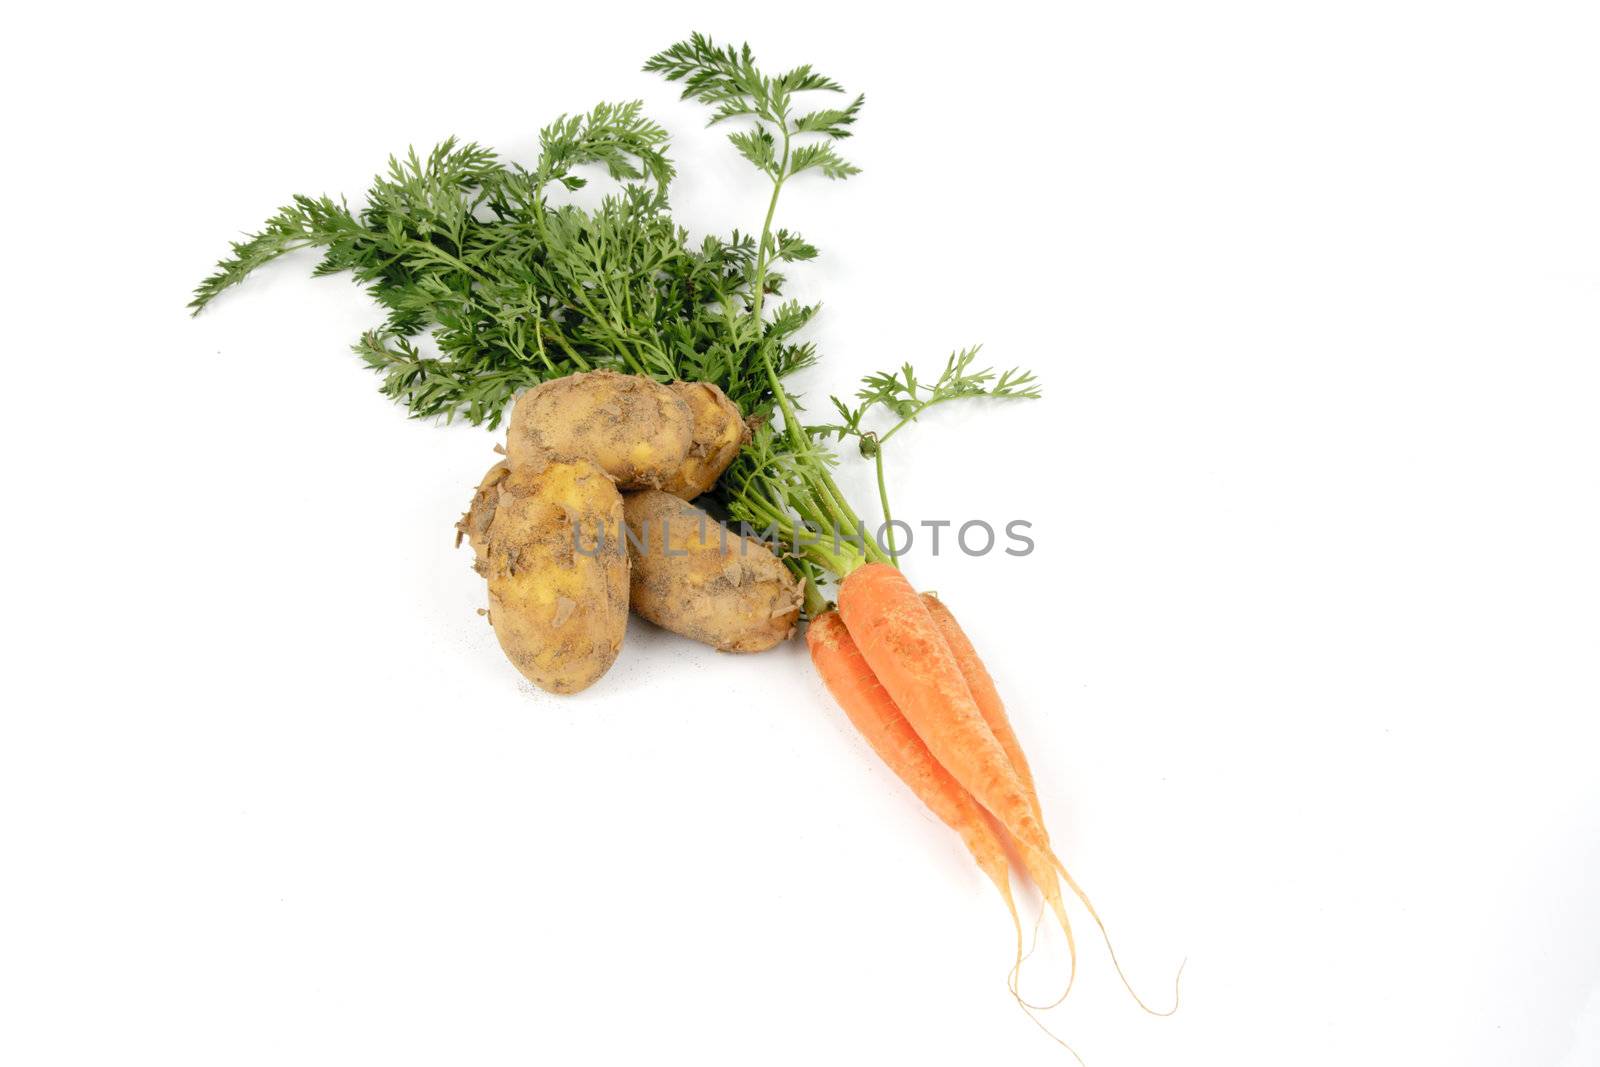 Bunch on raw crunchy carrots on a reflective white background